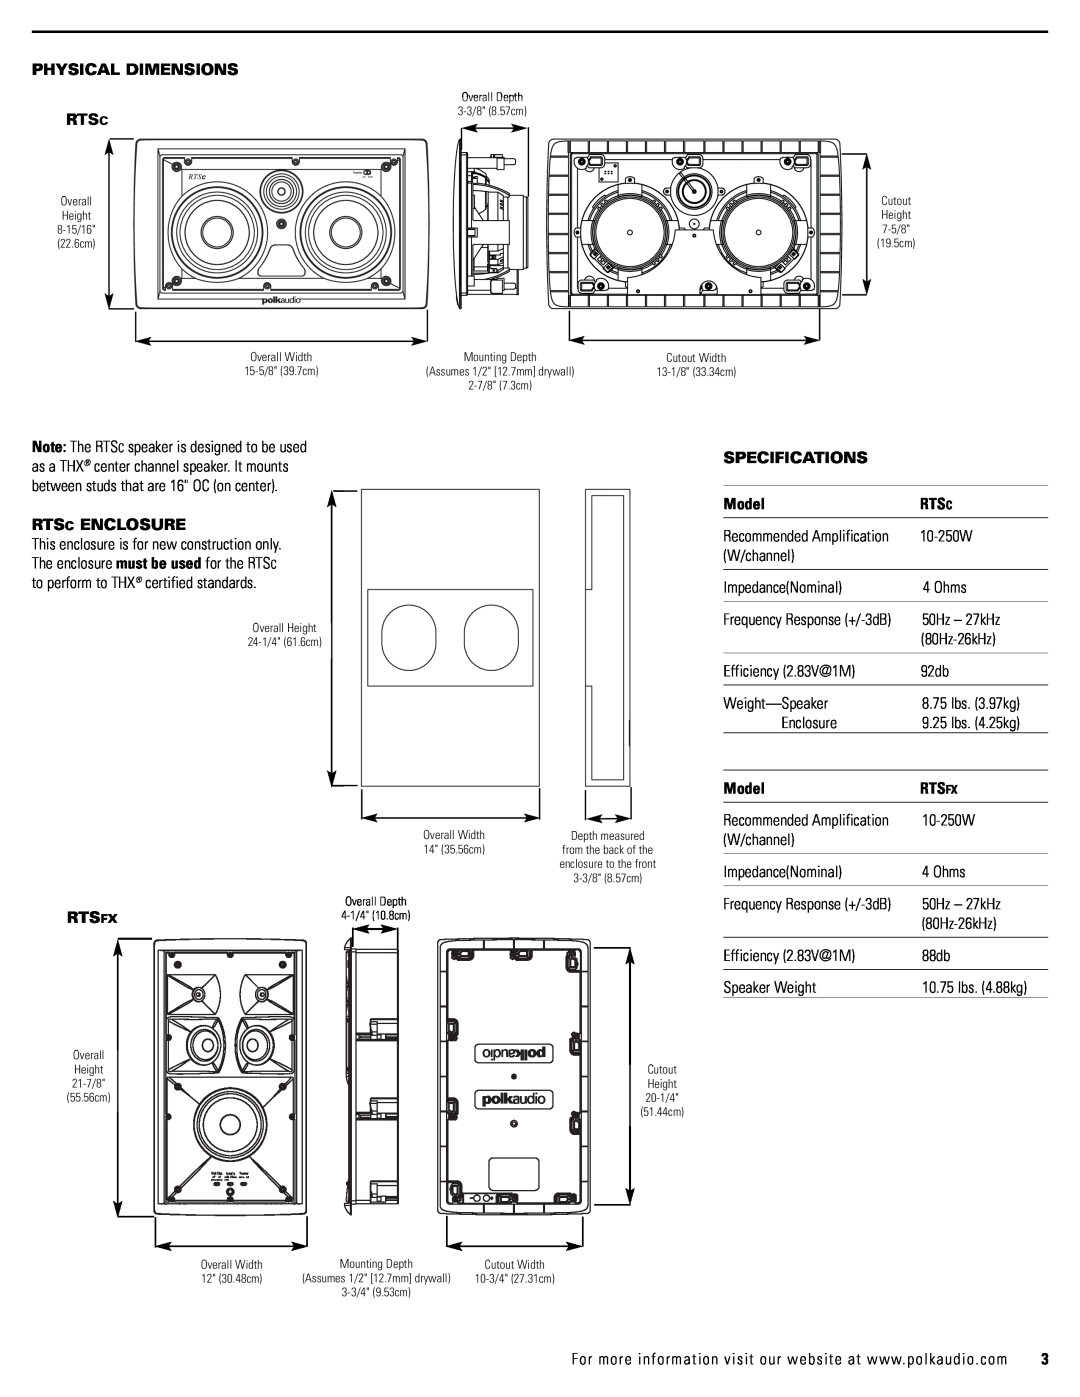 Polk Audio RTSFX, RTSC owner manual Physical Dimensions, Rtsc Enclosure, Rtsfx, Specifications, Model 